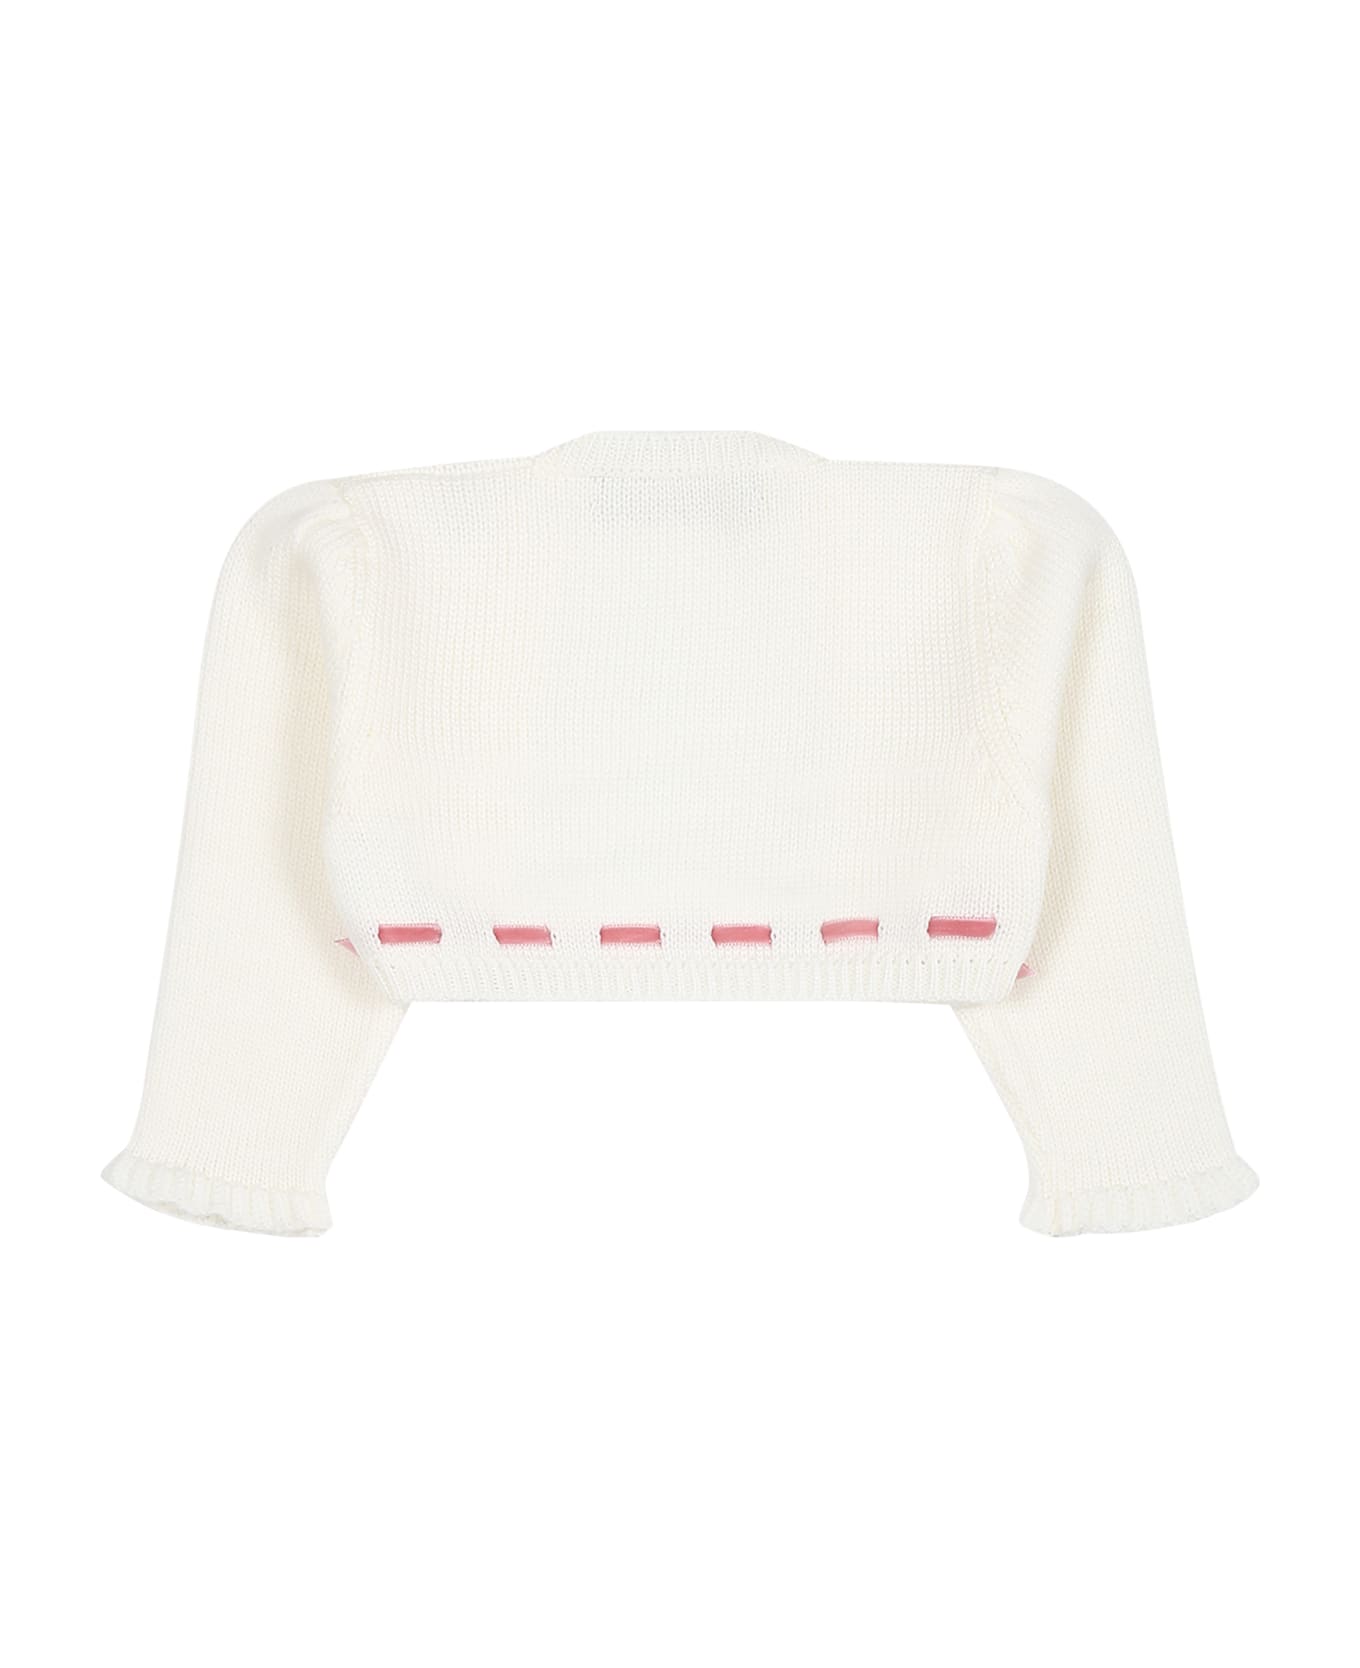 La stupenderia White Cardigan For Baby Girl With Bows - White